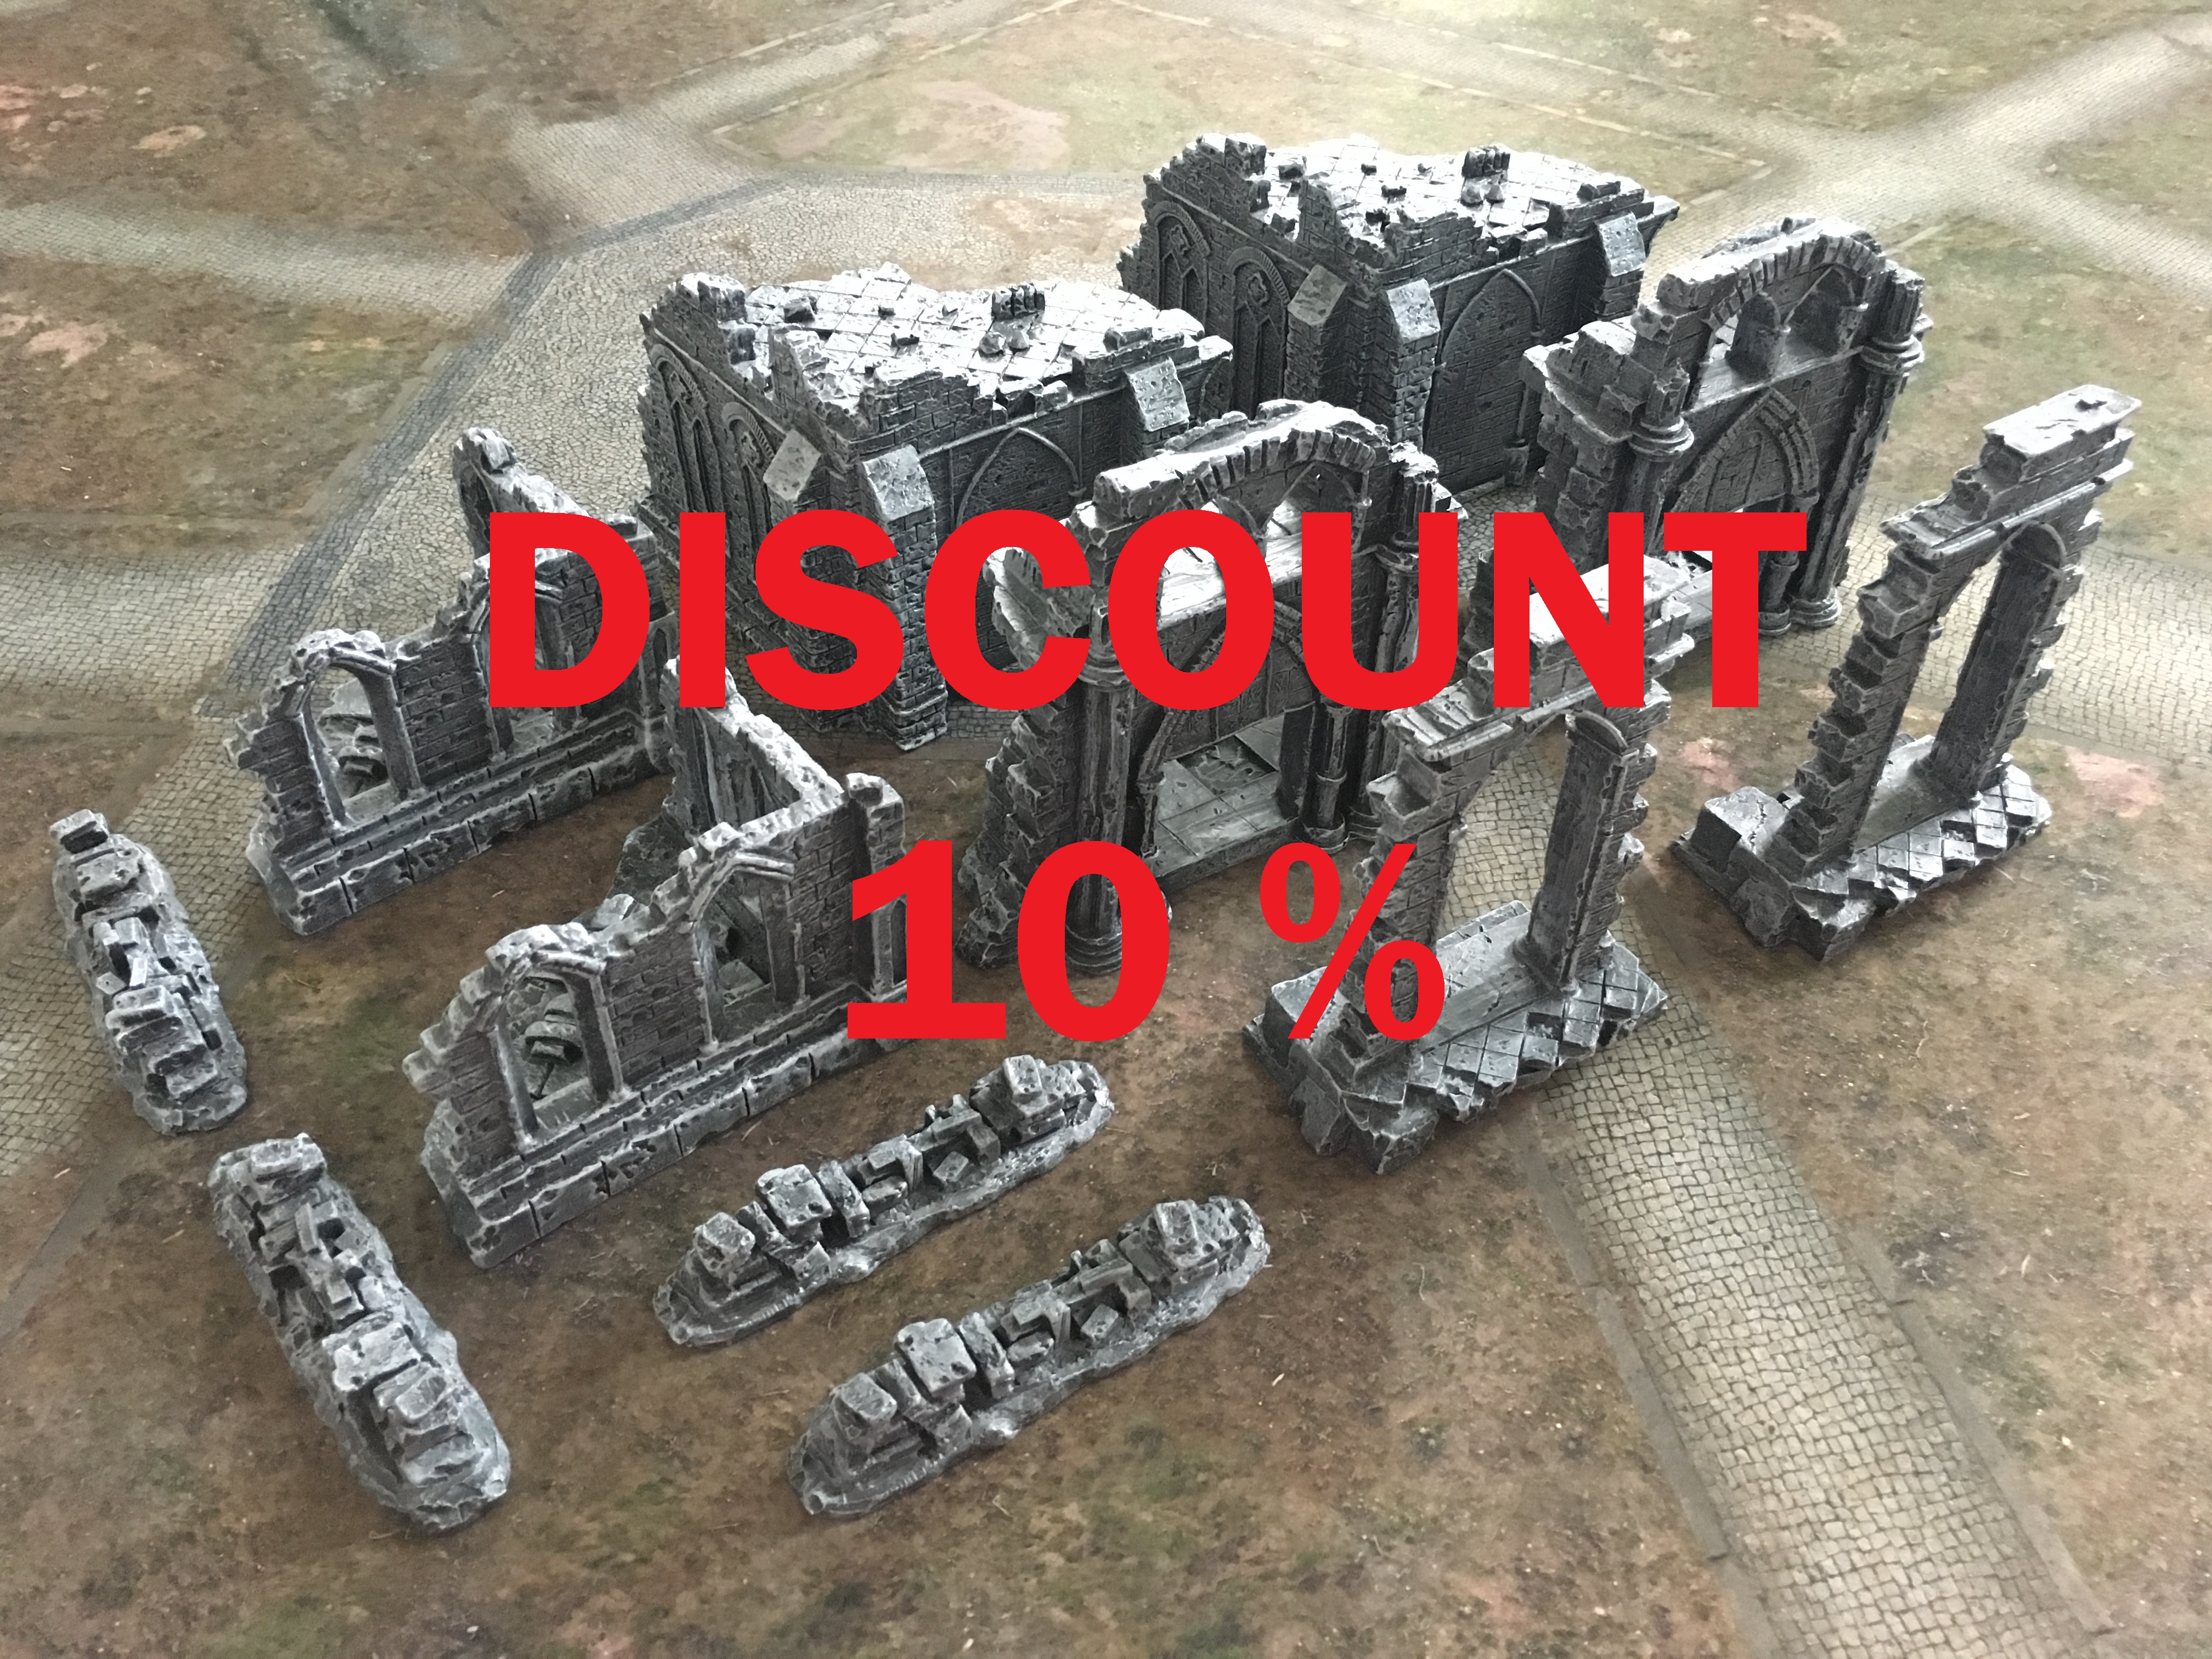 12 pcs of prepainted resin terrain with a discount now